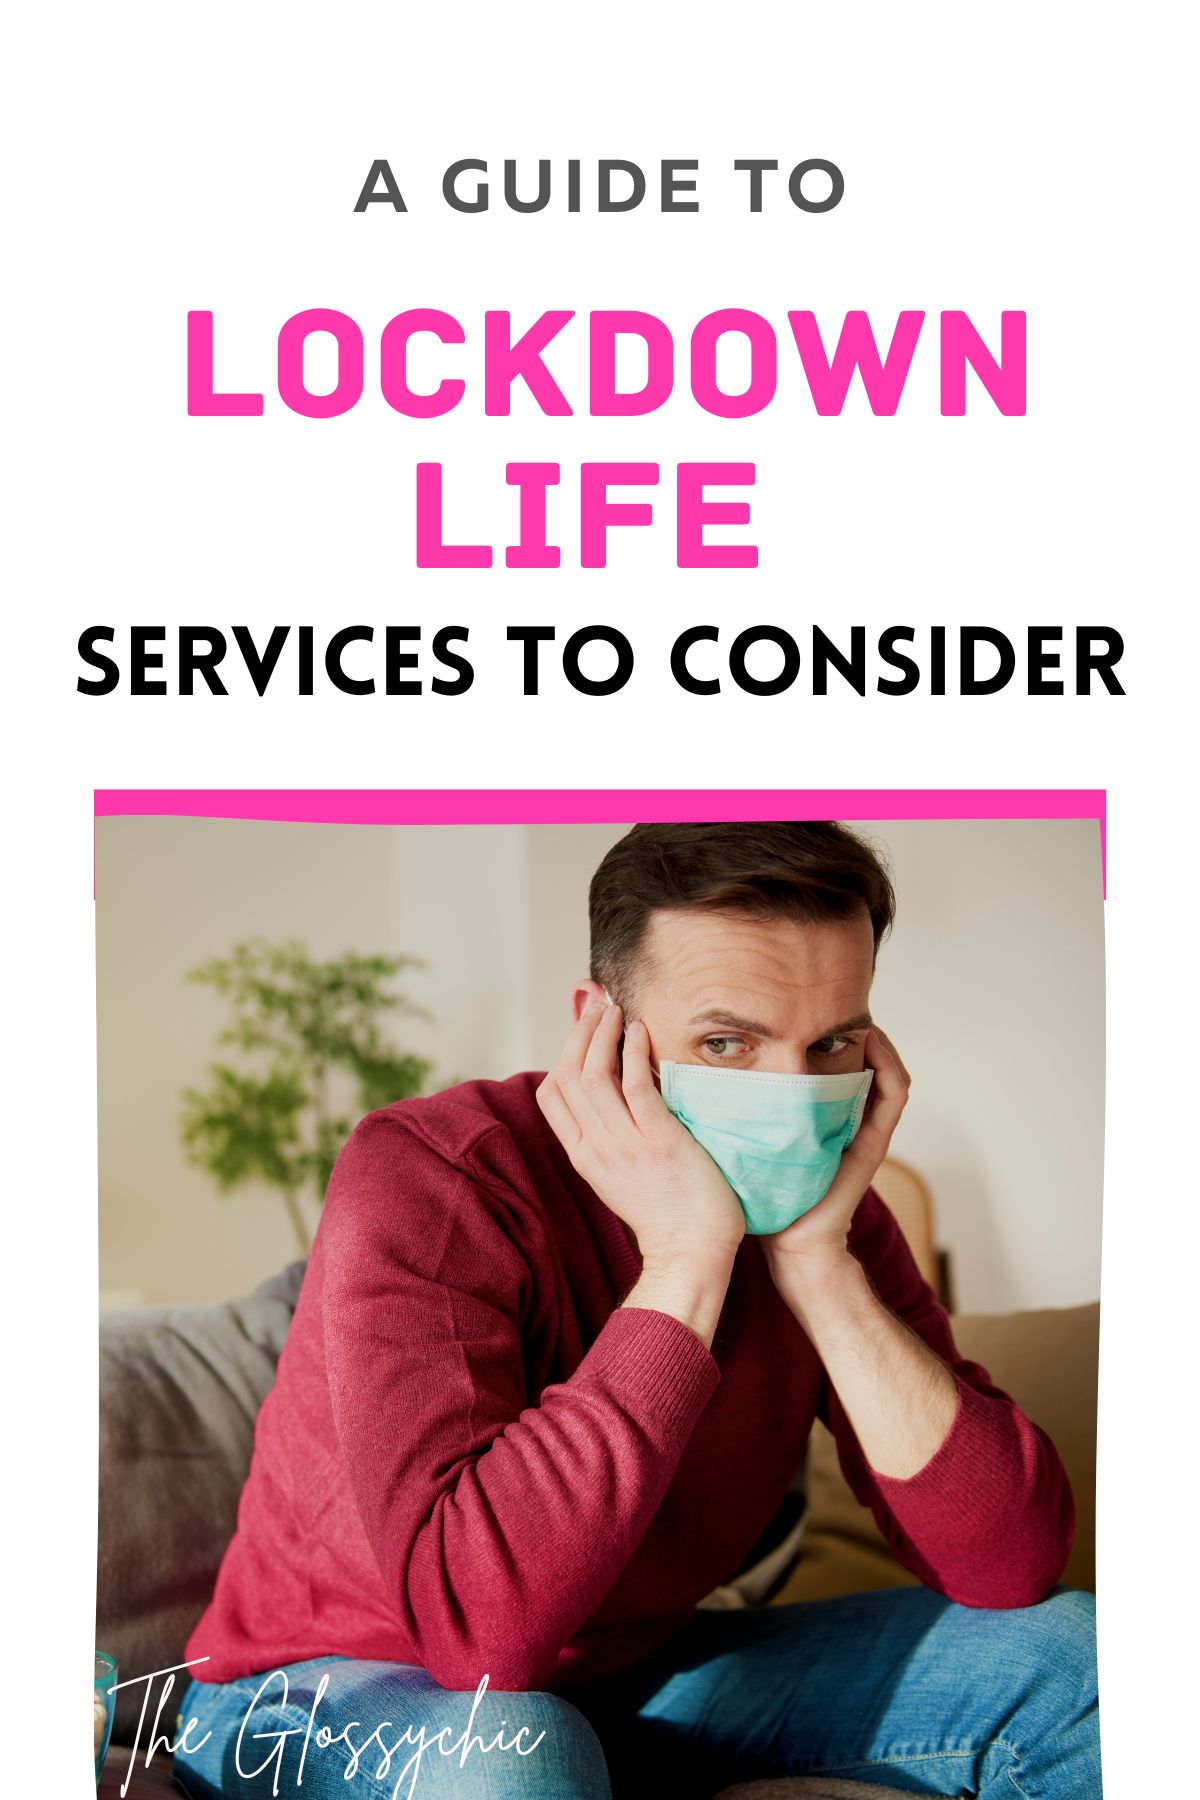 A Guide To Lockdown Life: Services To Consider